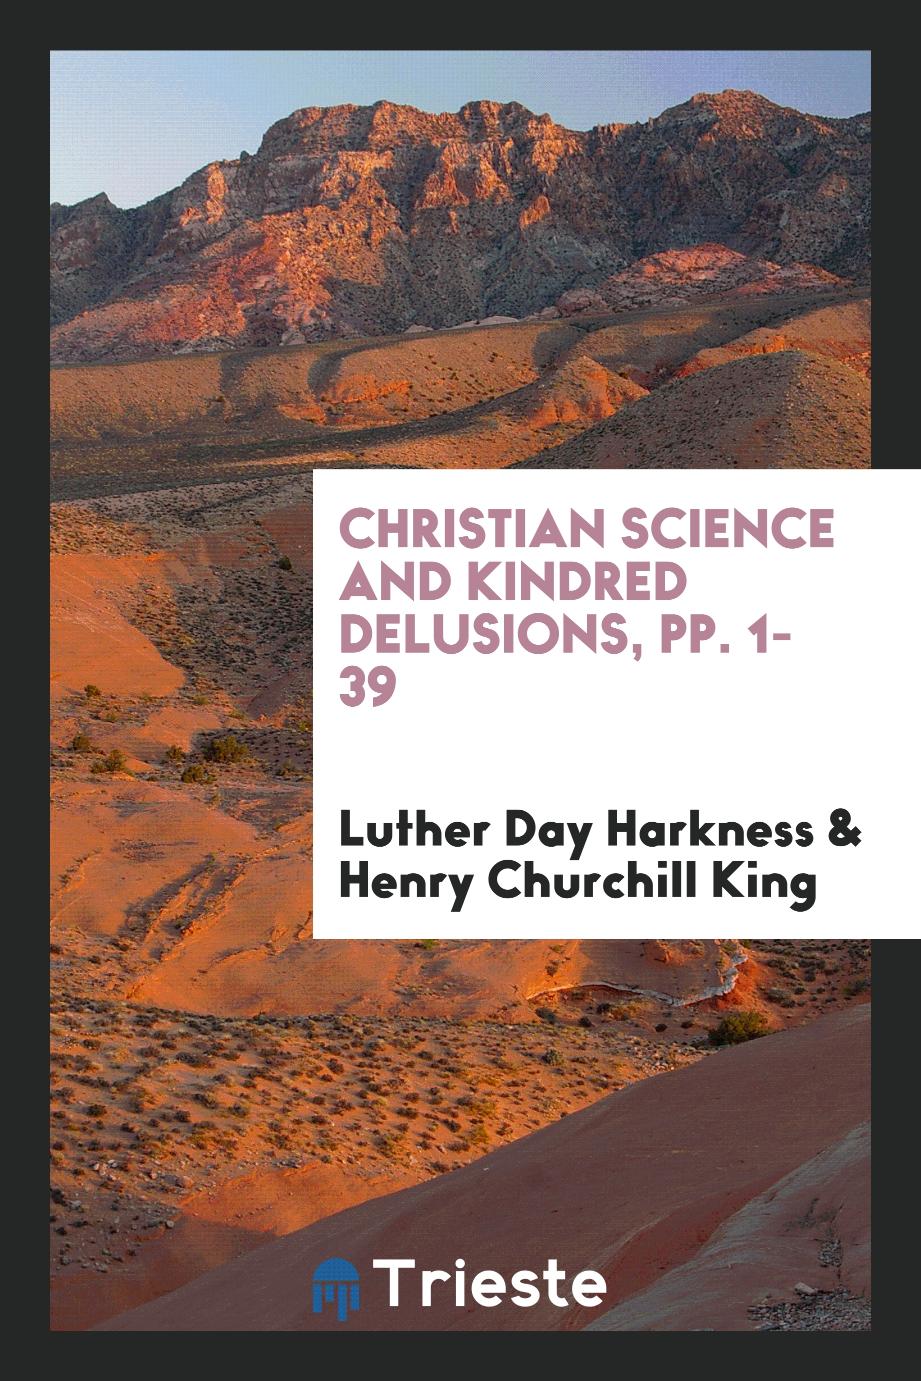 Christian Science and Kindred Delusions, pp. 1-39